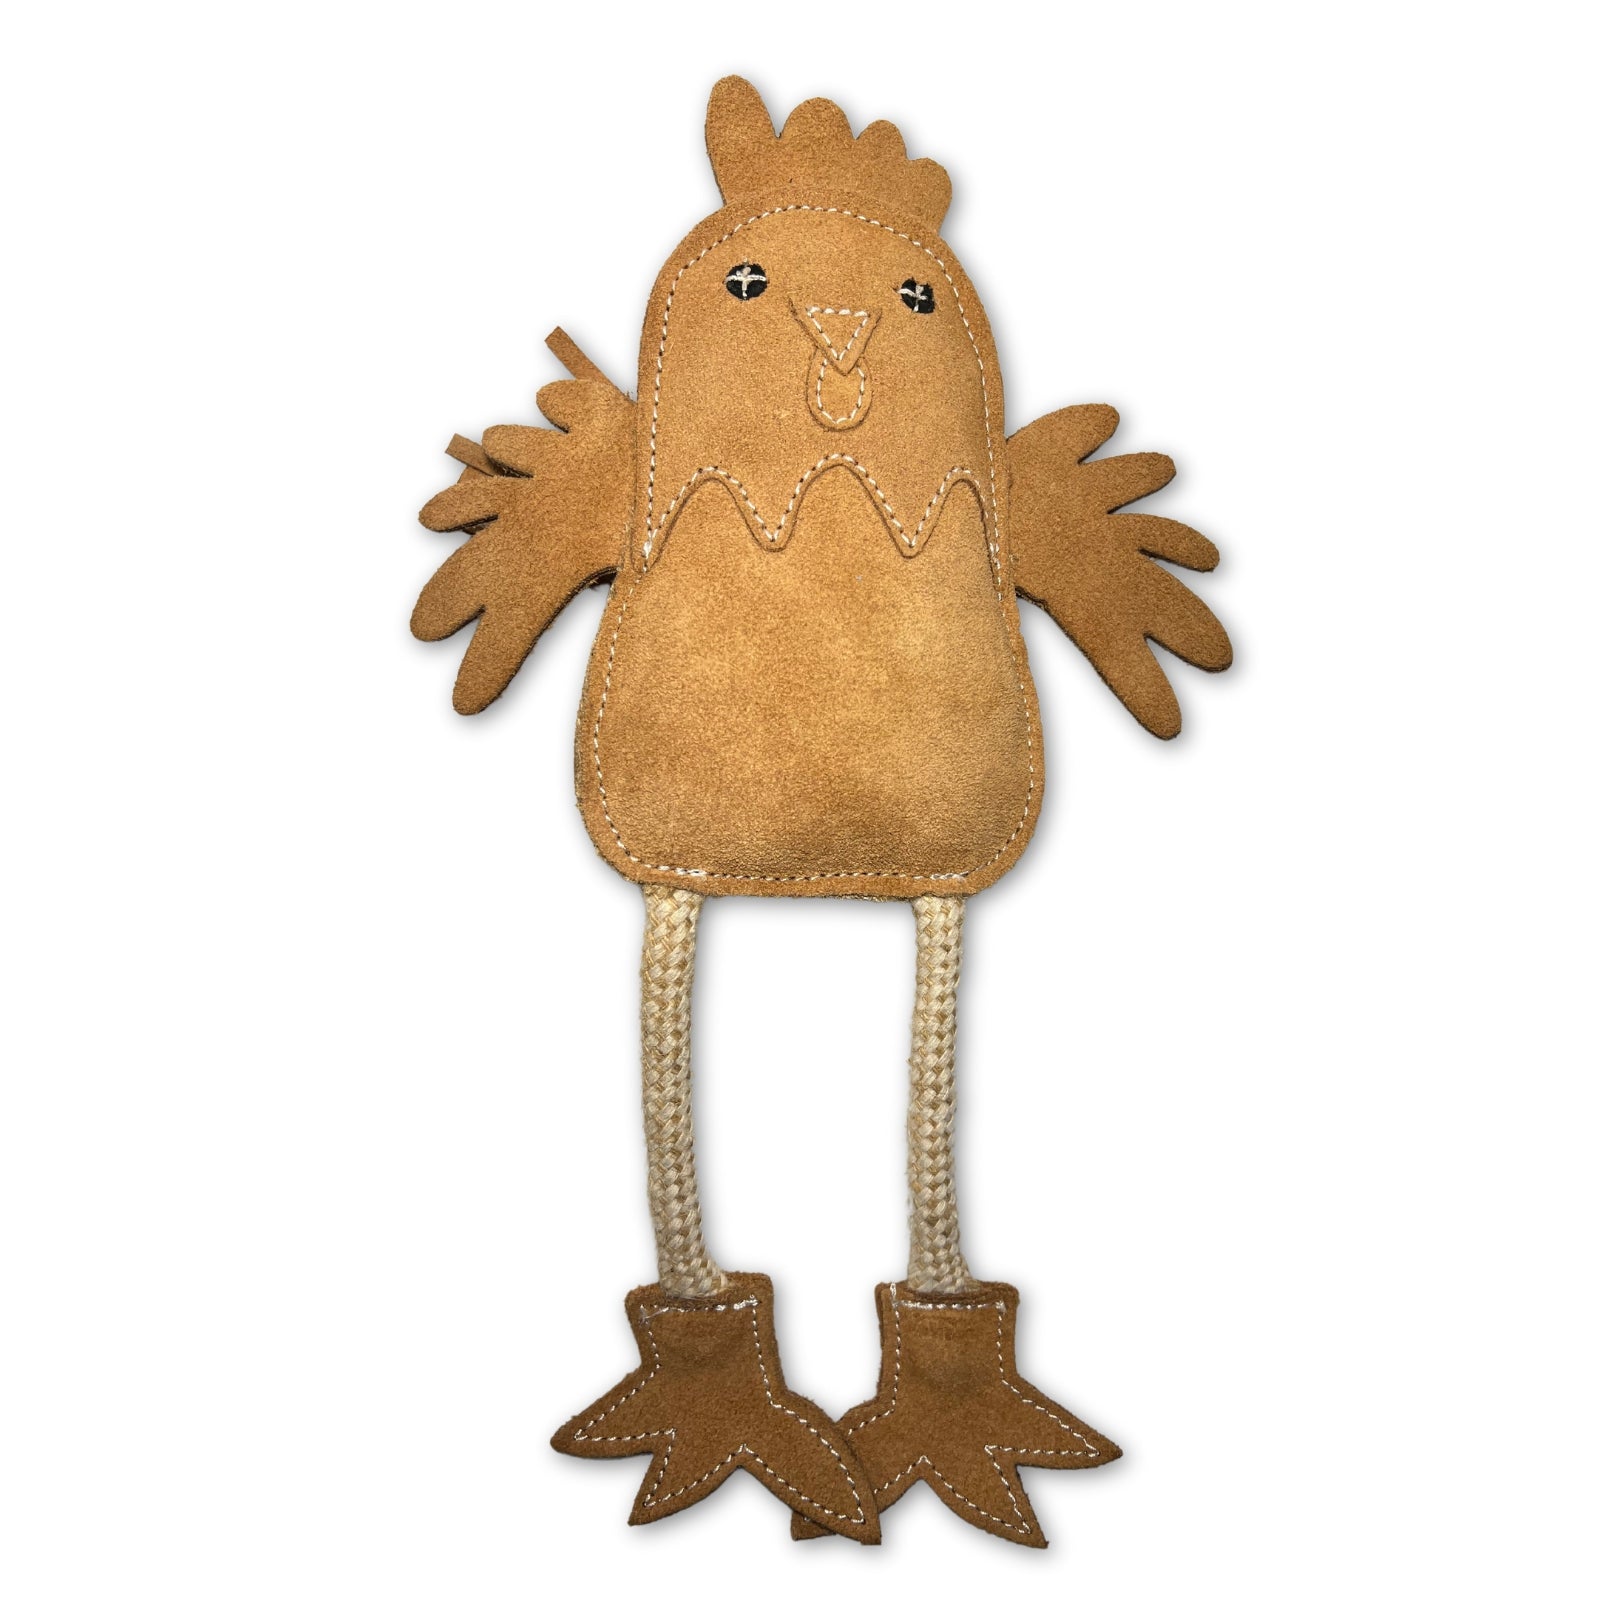 A whimsical, handmade plush Matilda the Chicken - Natural toy by Georgie Paws, with a tan body, stitched detailing, and long, dangling legs finished with fluffy feet, isolated on a white background.